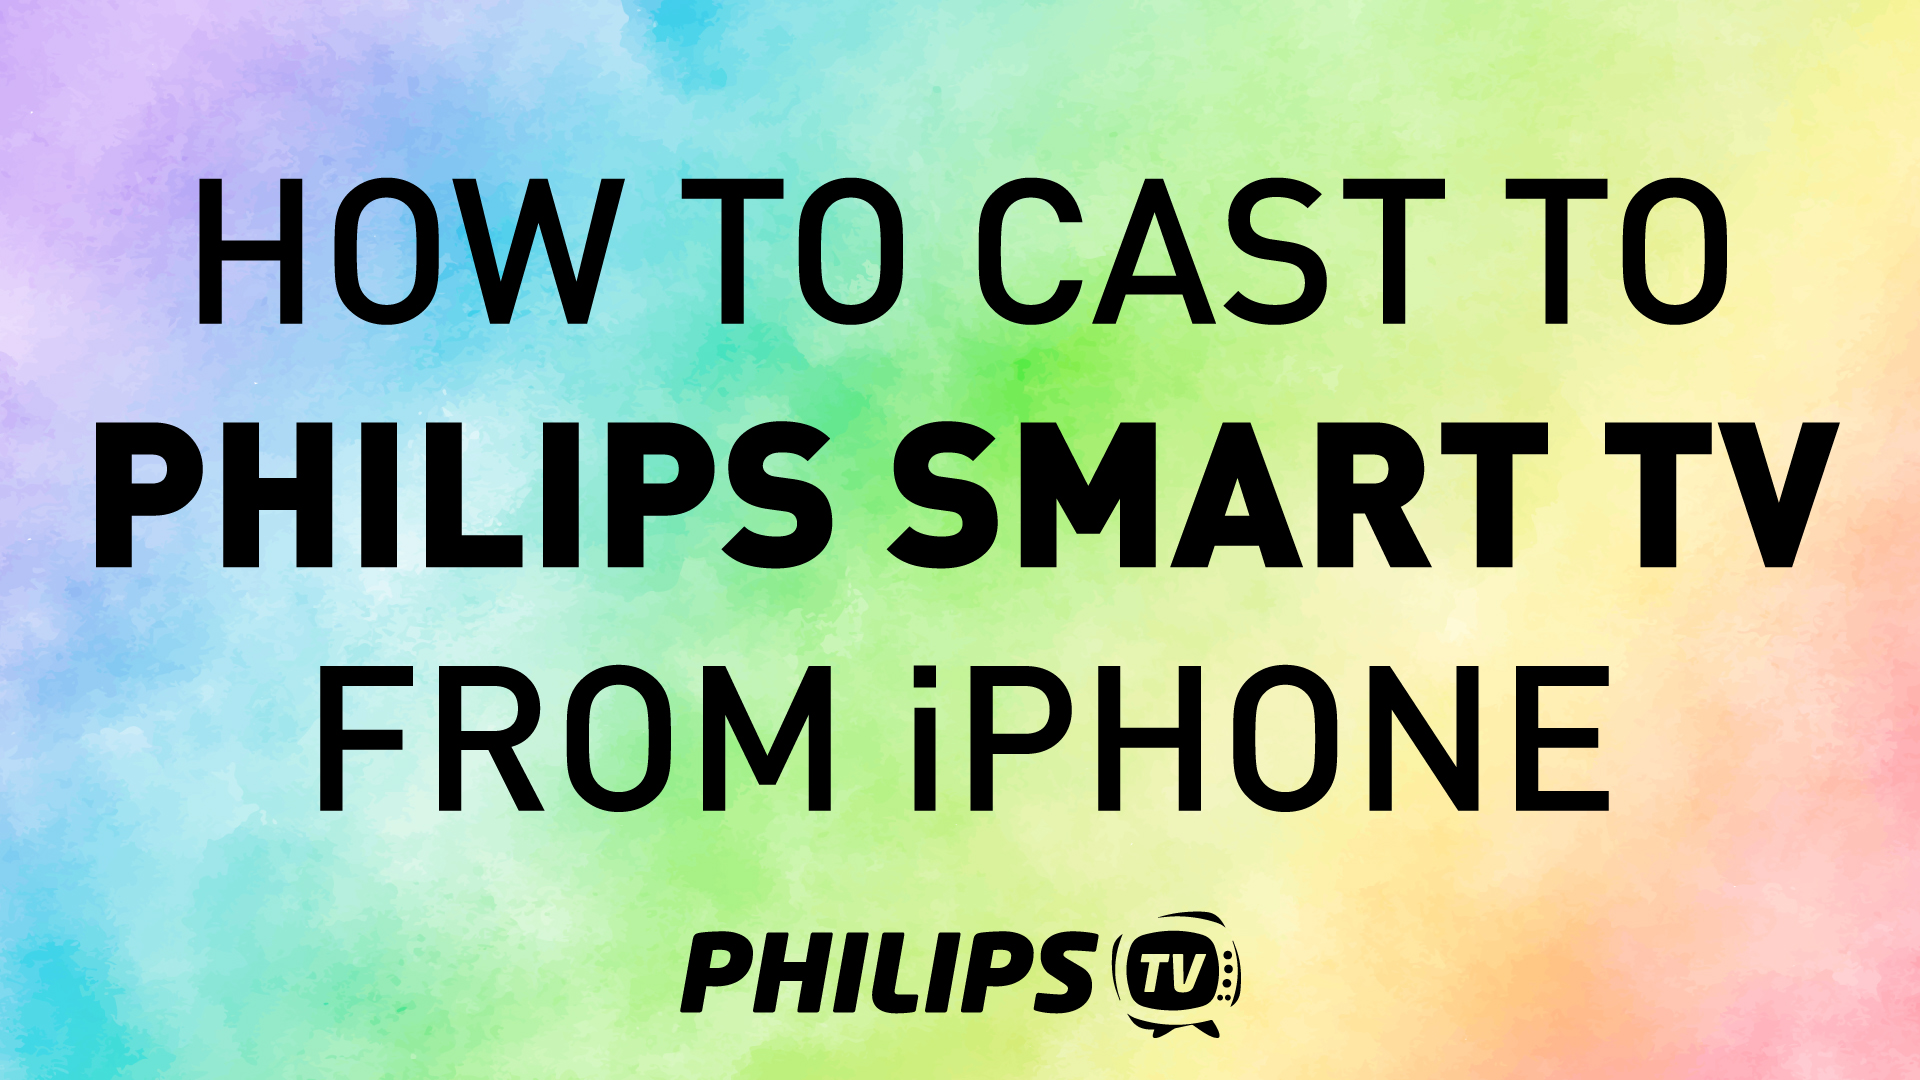 How to Cast to Philips Smart TV From iPhone